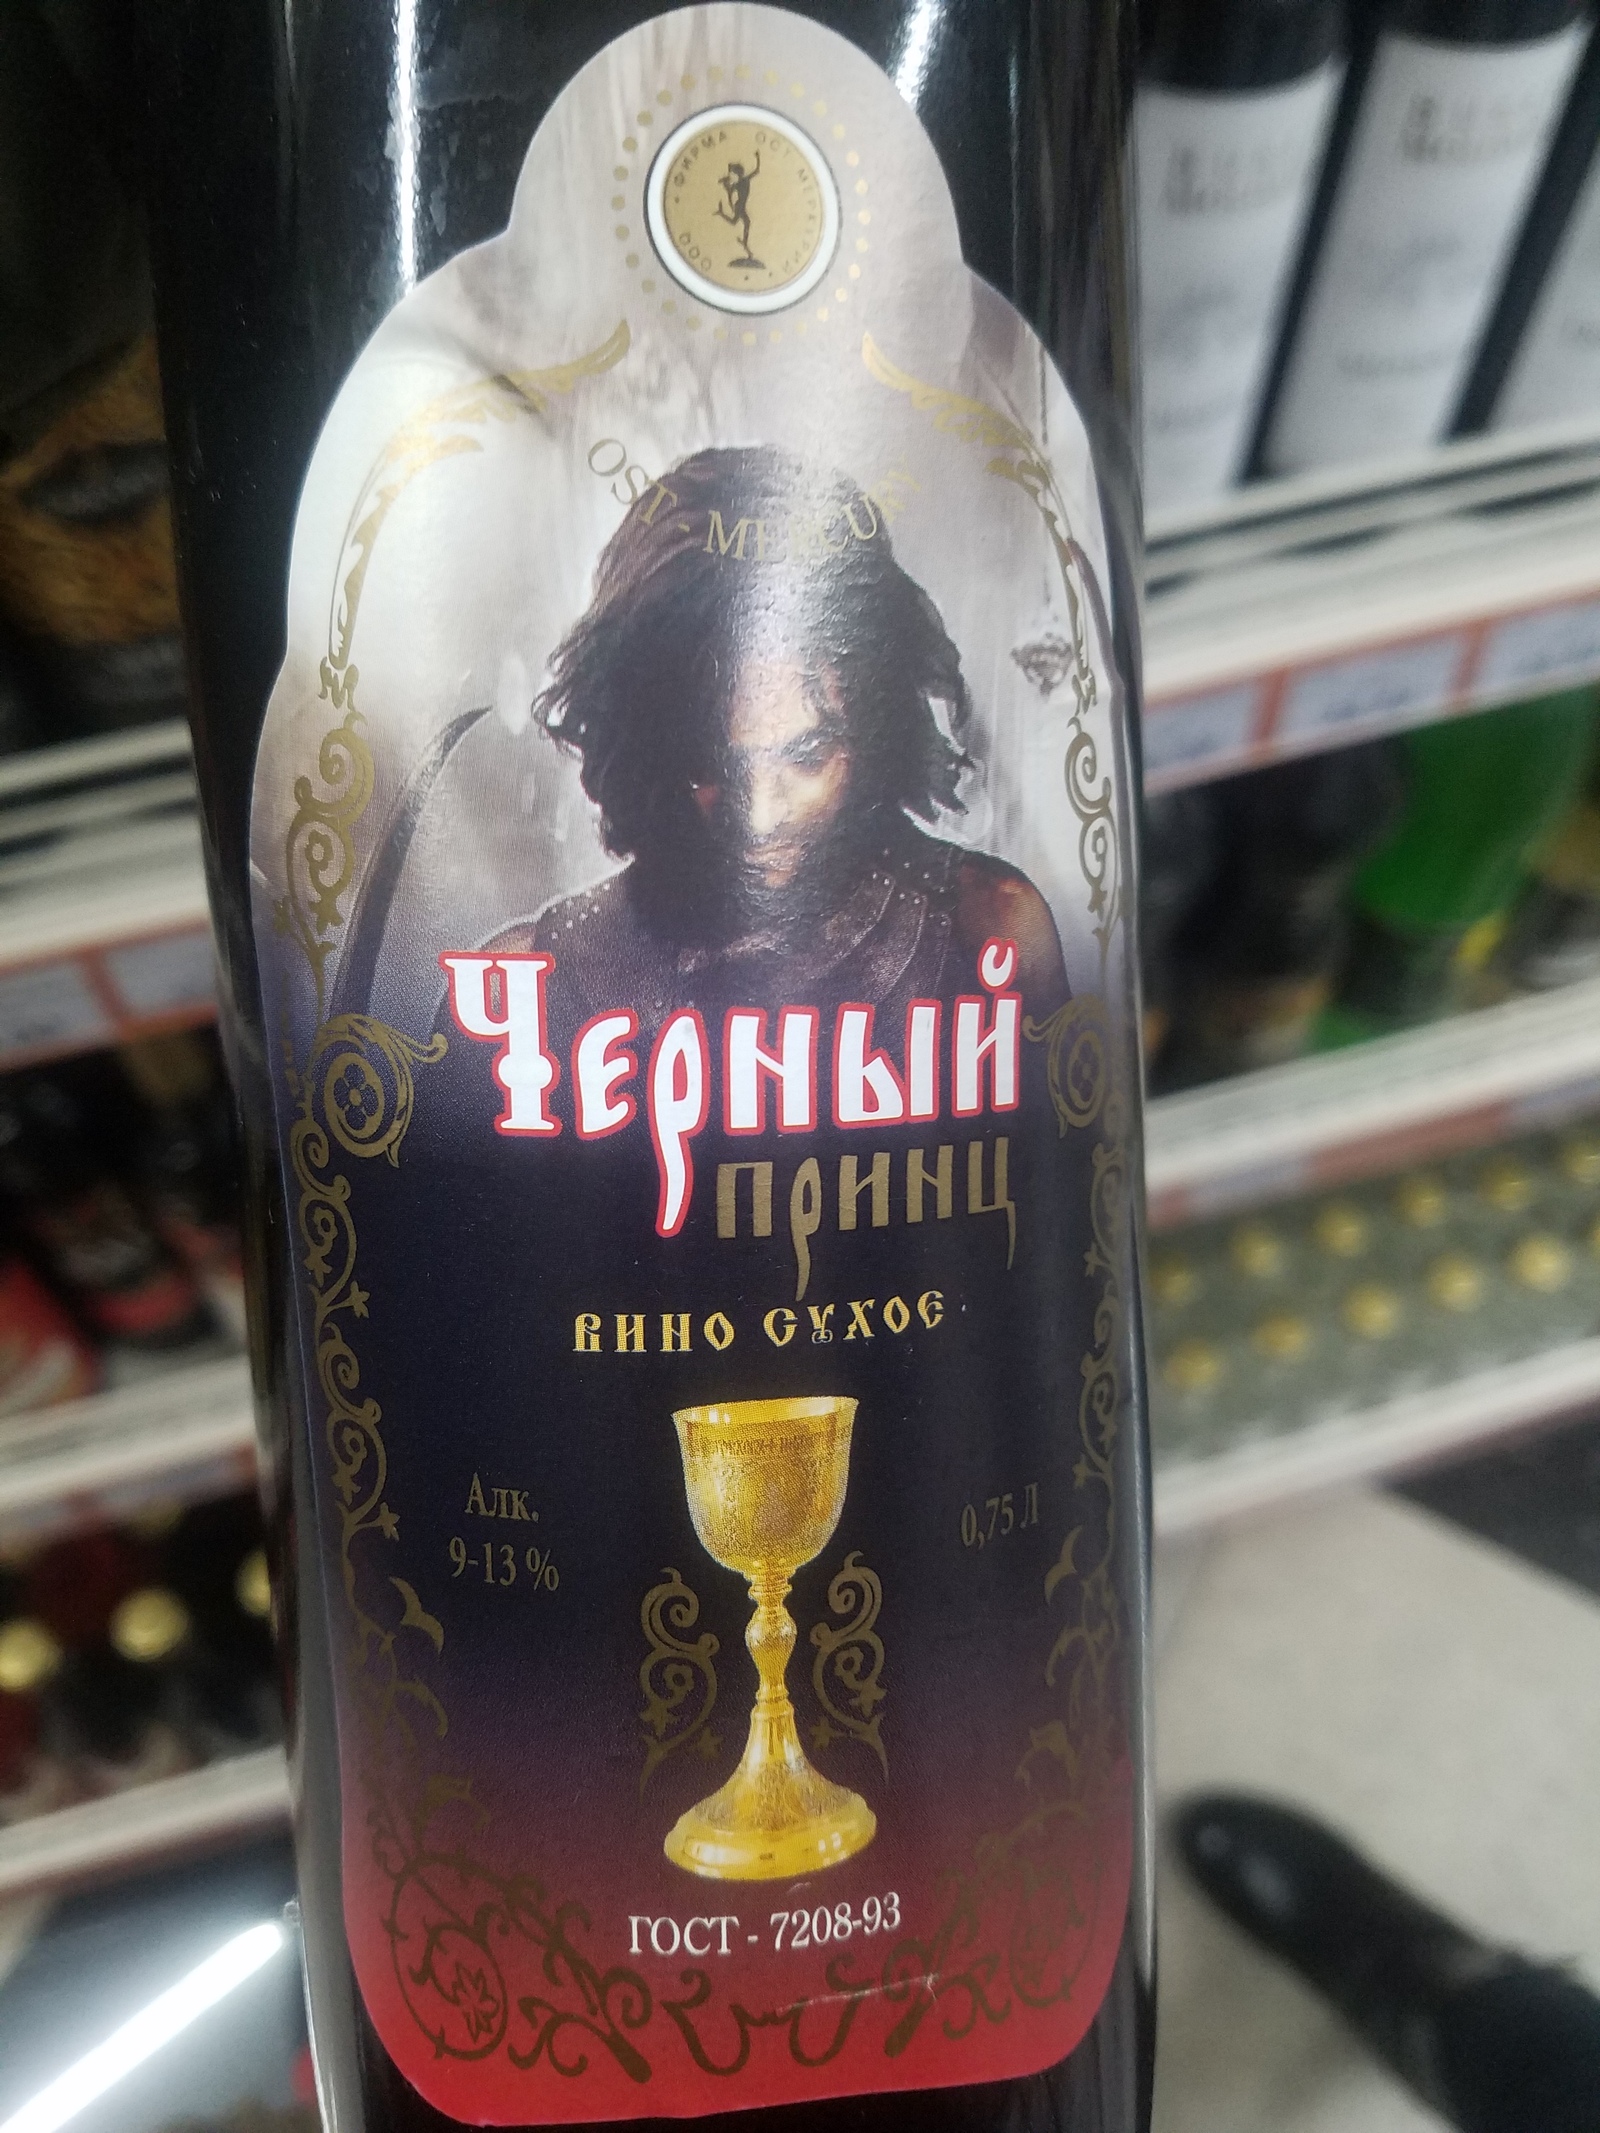 Persian wine - My, Prince of Persia, Wine, Business, Label